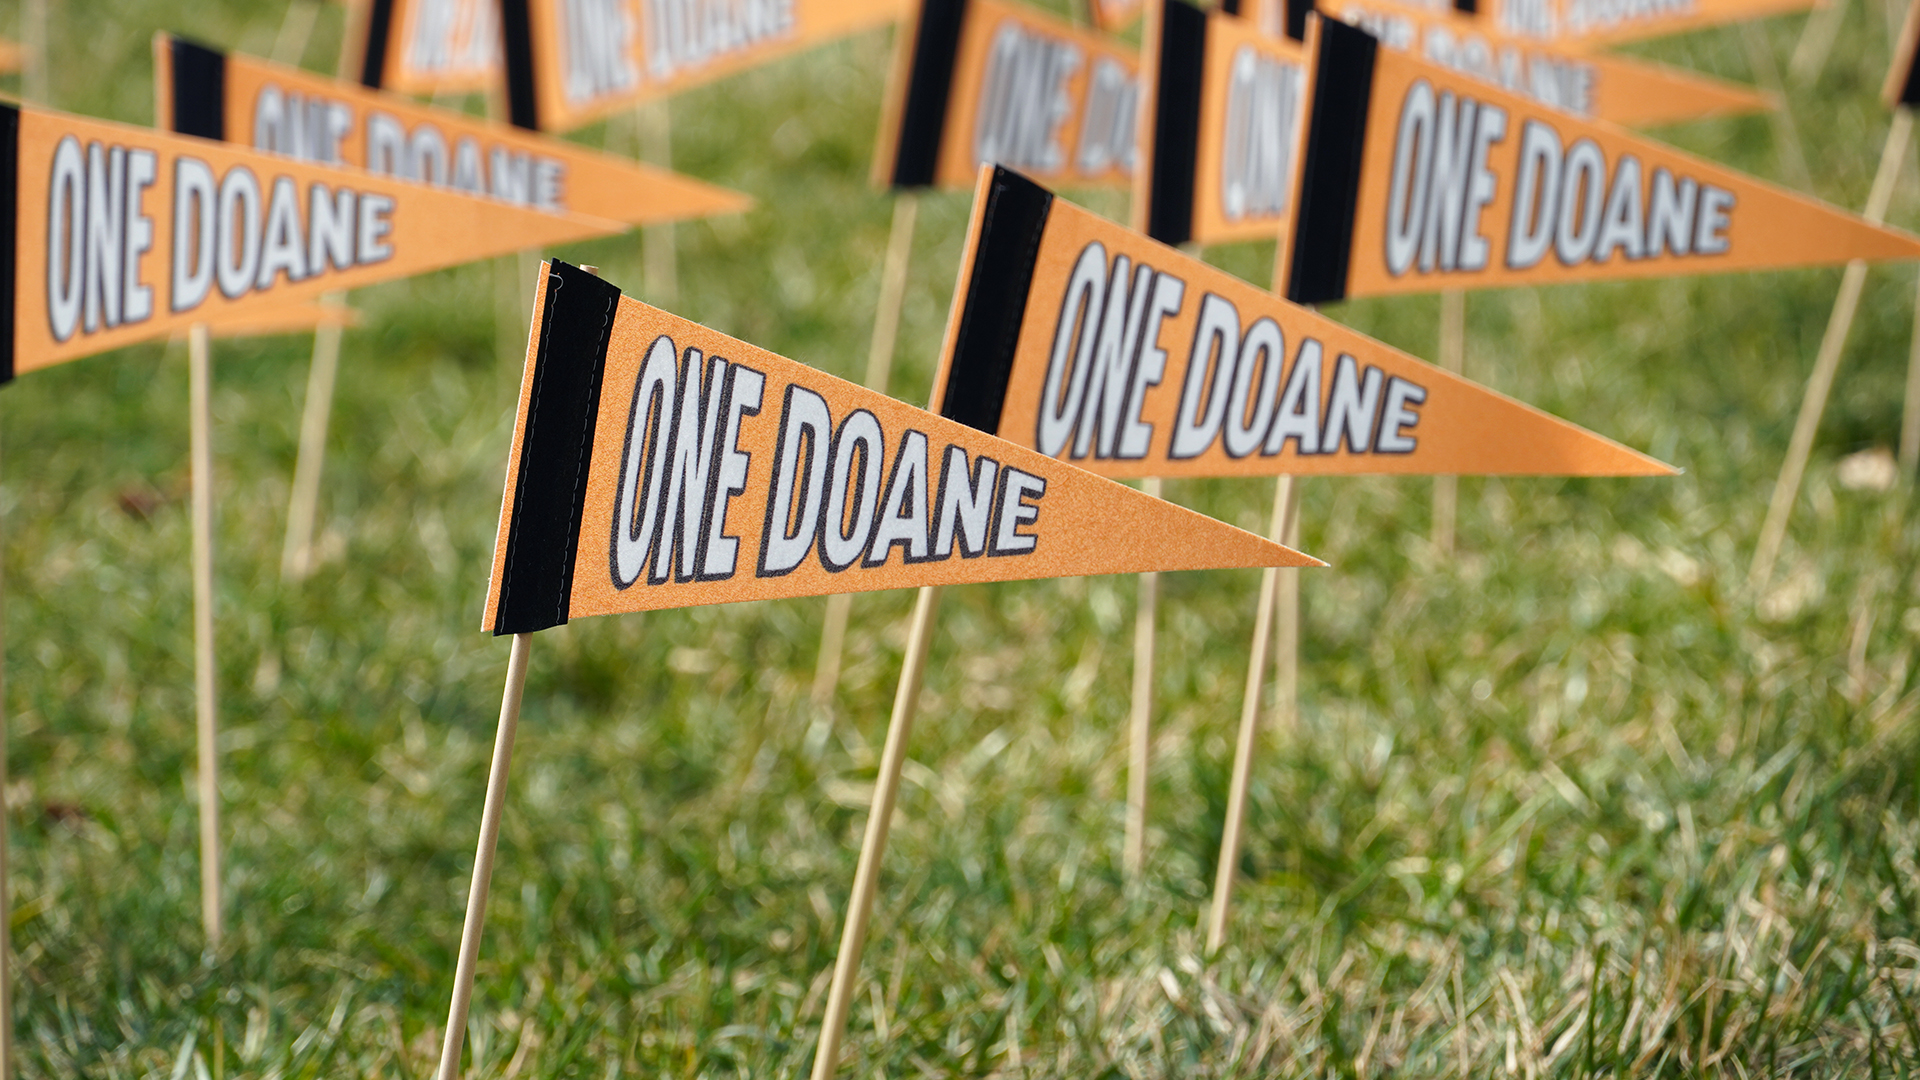 Several orange pennants are shown up close. The pennants are orange with white O-N-E D-O-A-N-E lettering that represents the One Day. One Doane. Campaign. The pennants are on sticks placed inside the green grass of Cassel Outdoor Theatre on Doane’s campus.